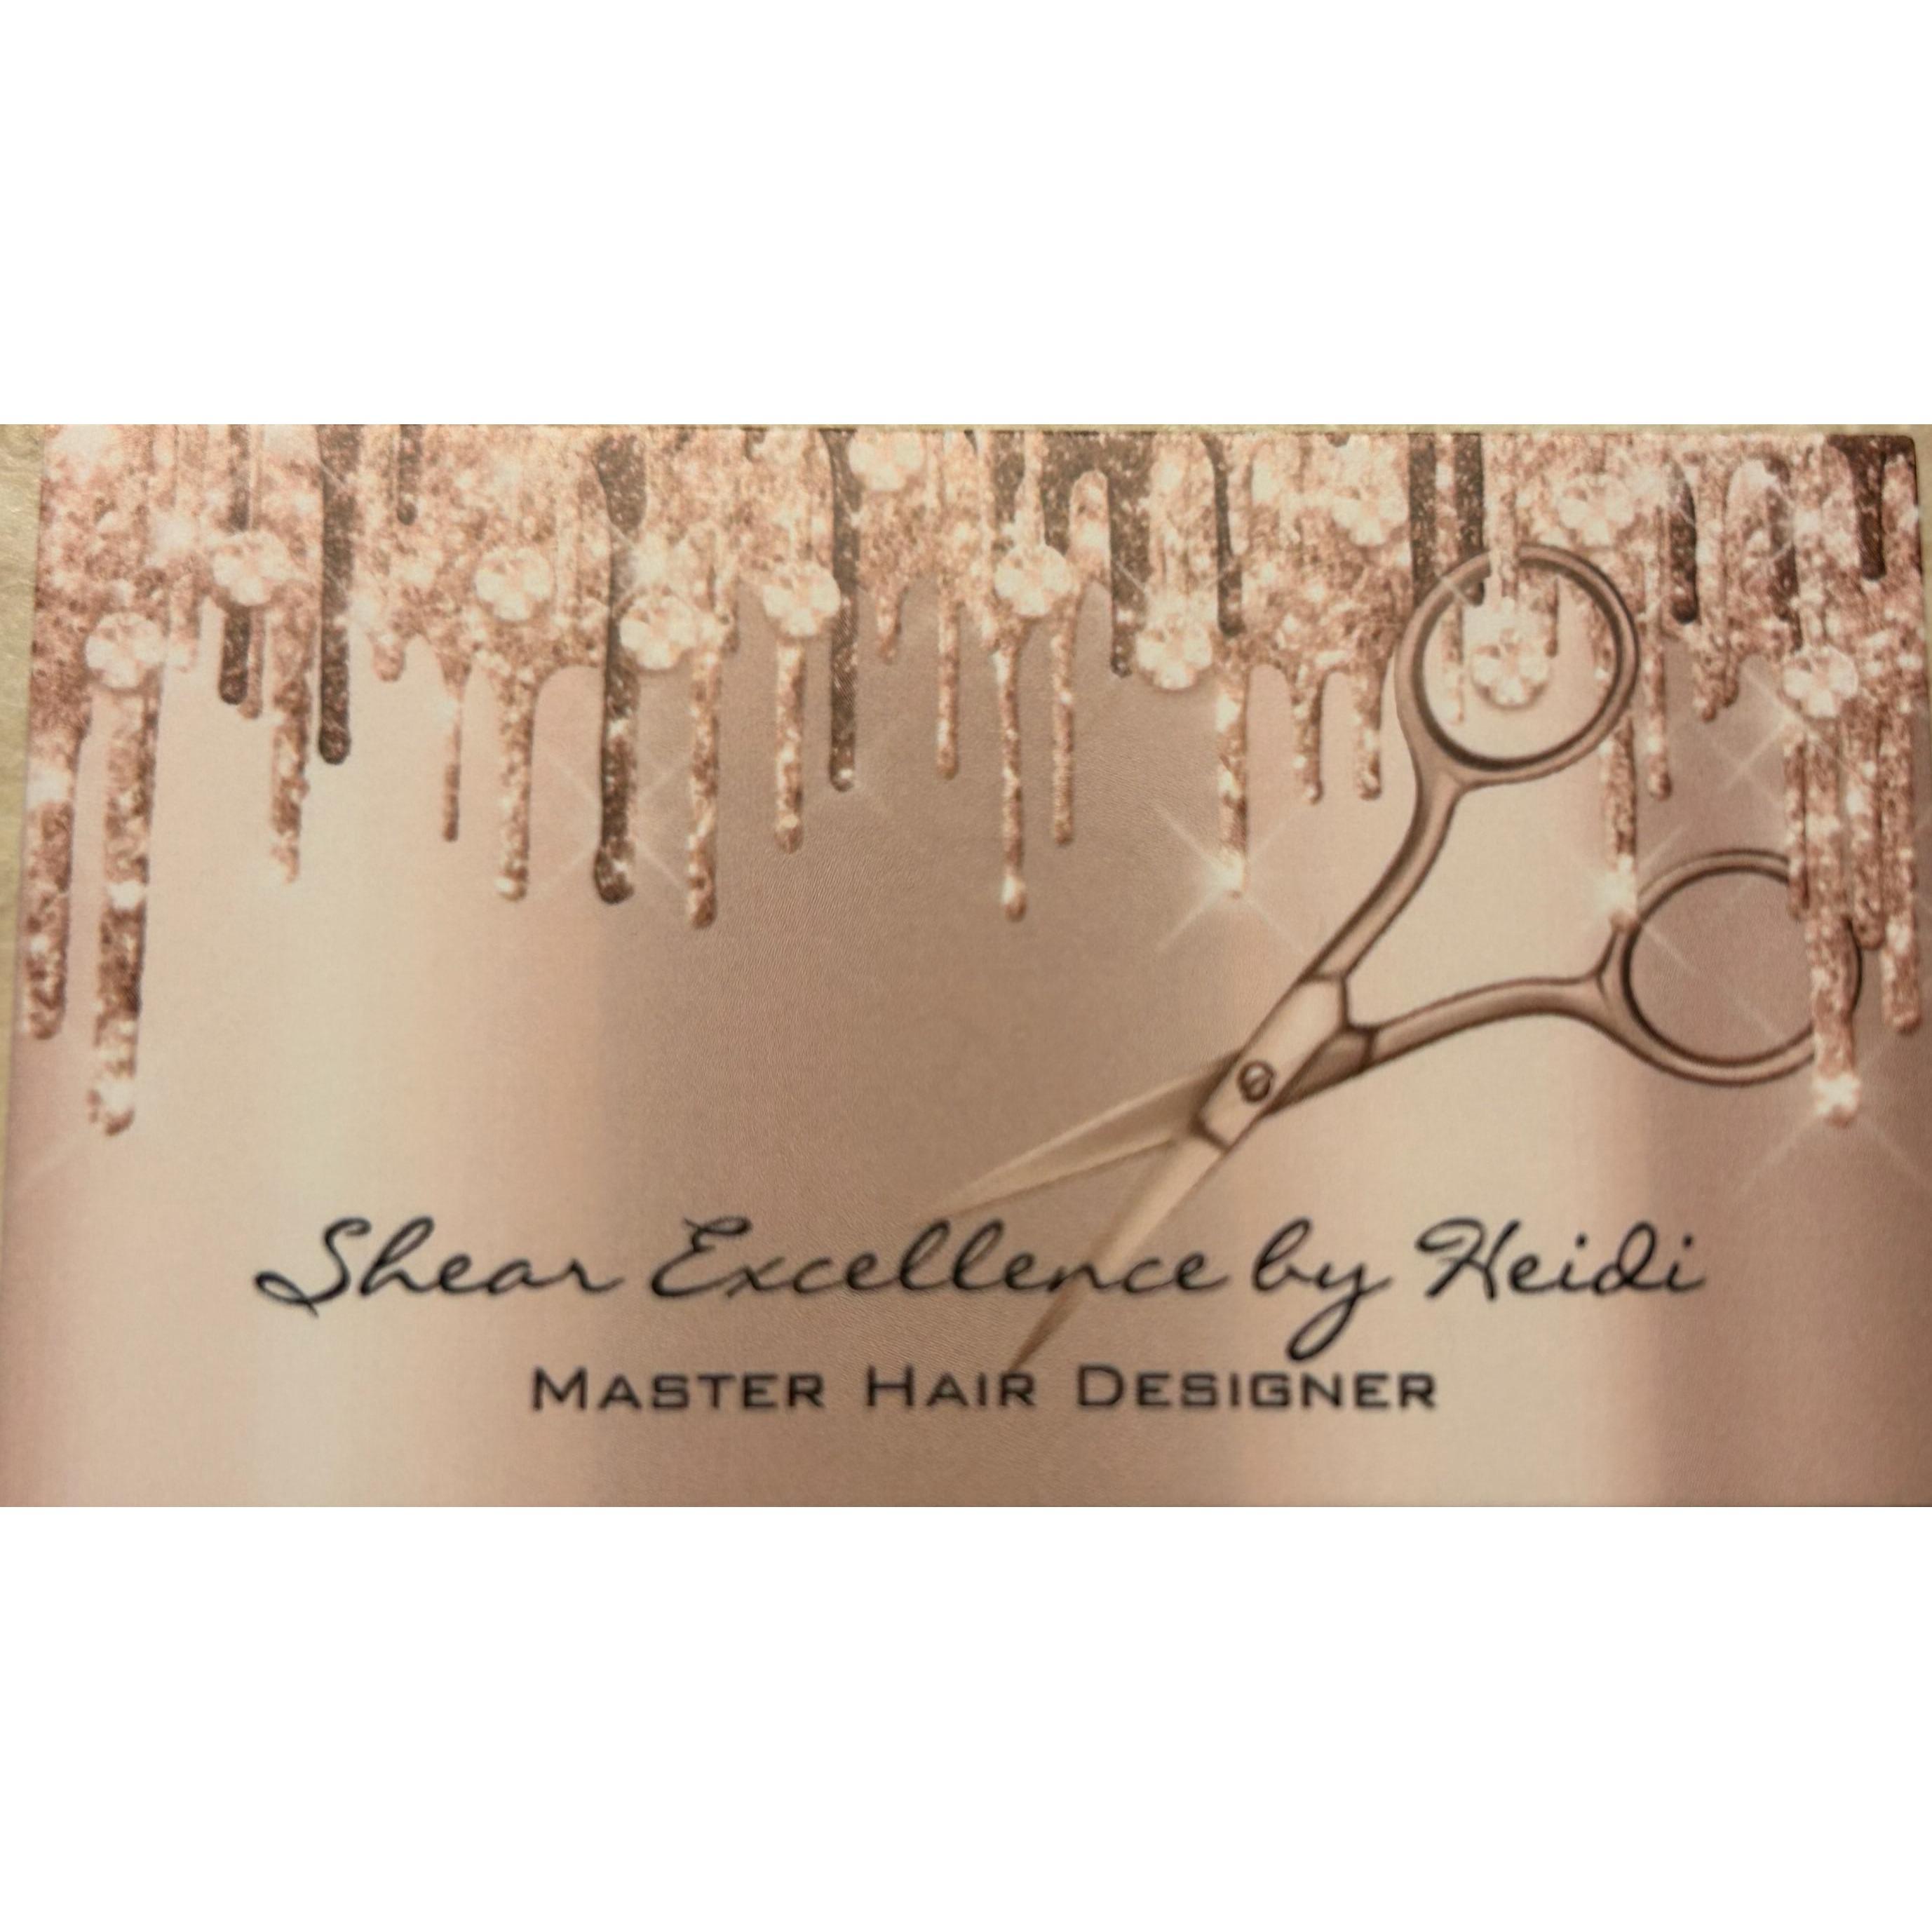 Shear Excellence by Heidi - Sandy, UT 84094 - (801)885-2017 | ShowMeLocal.com